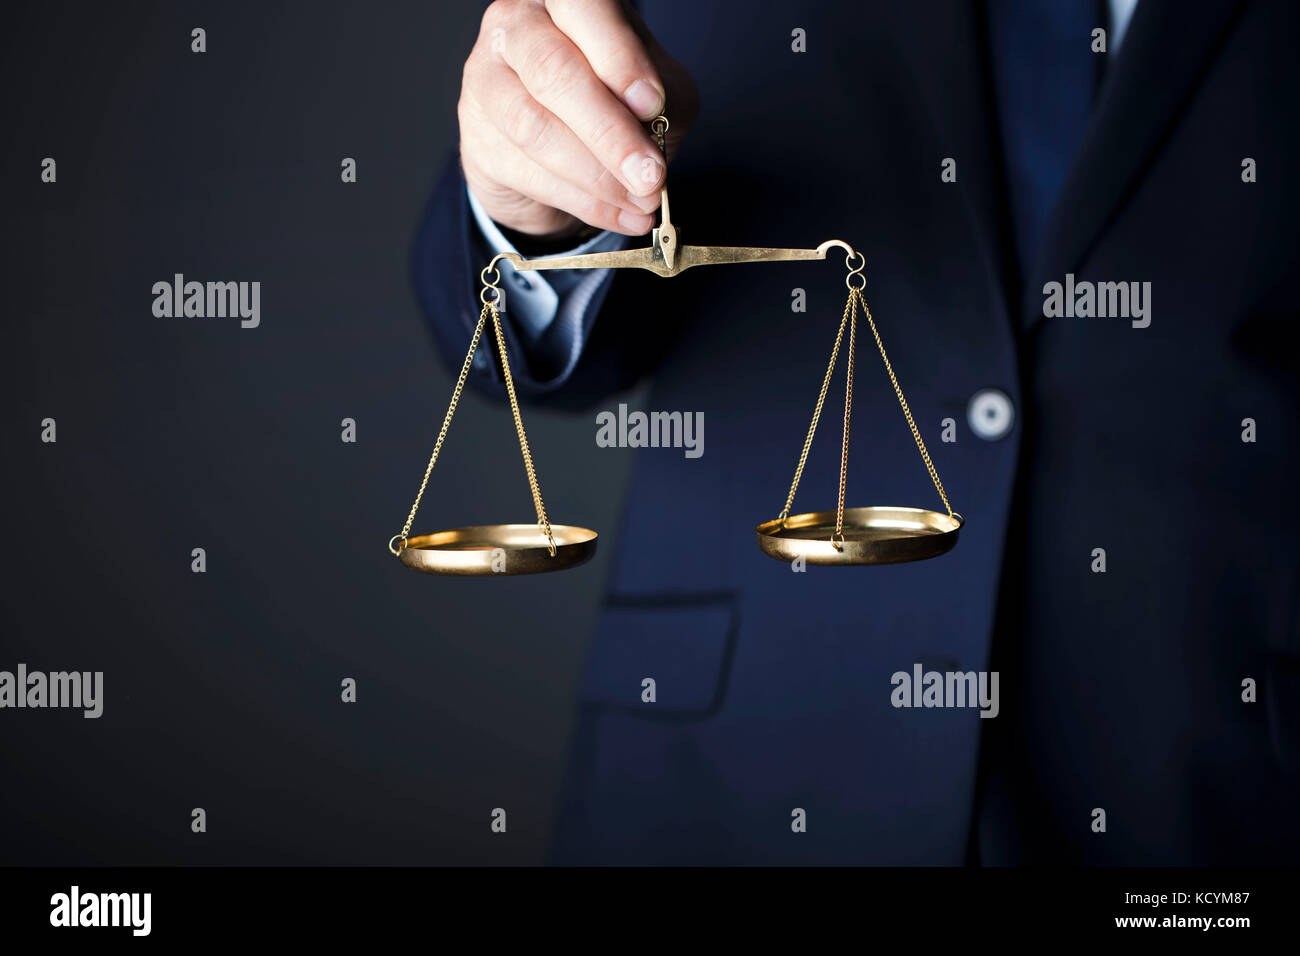 Counselor concept. Gavel and scale. Stock Photo